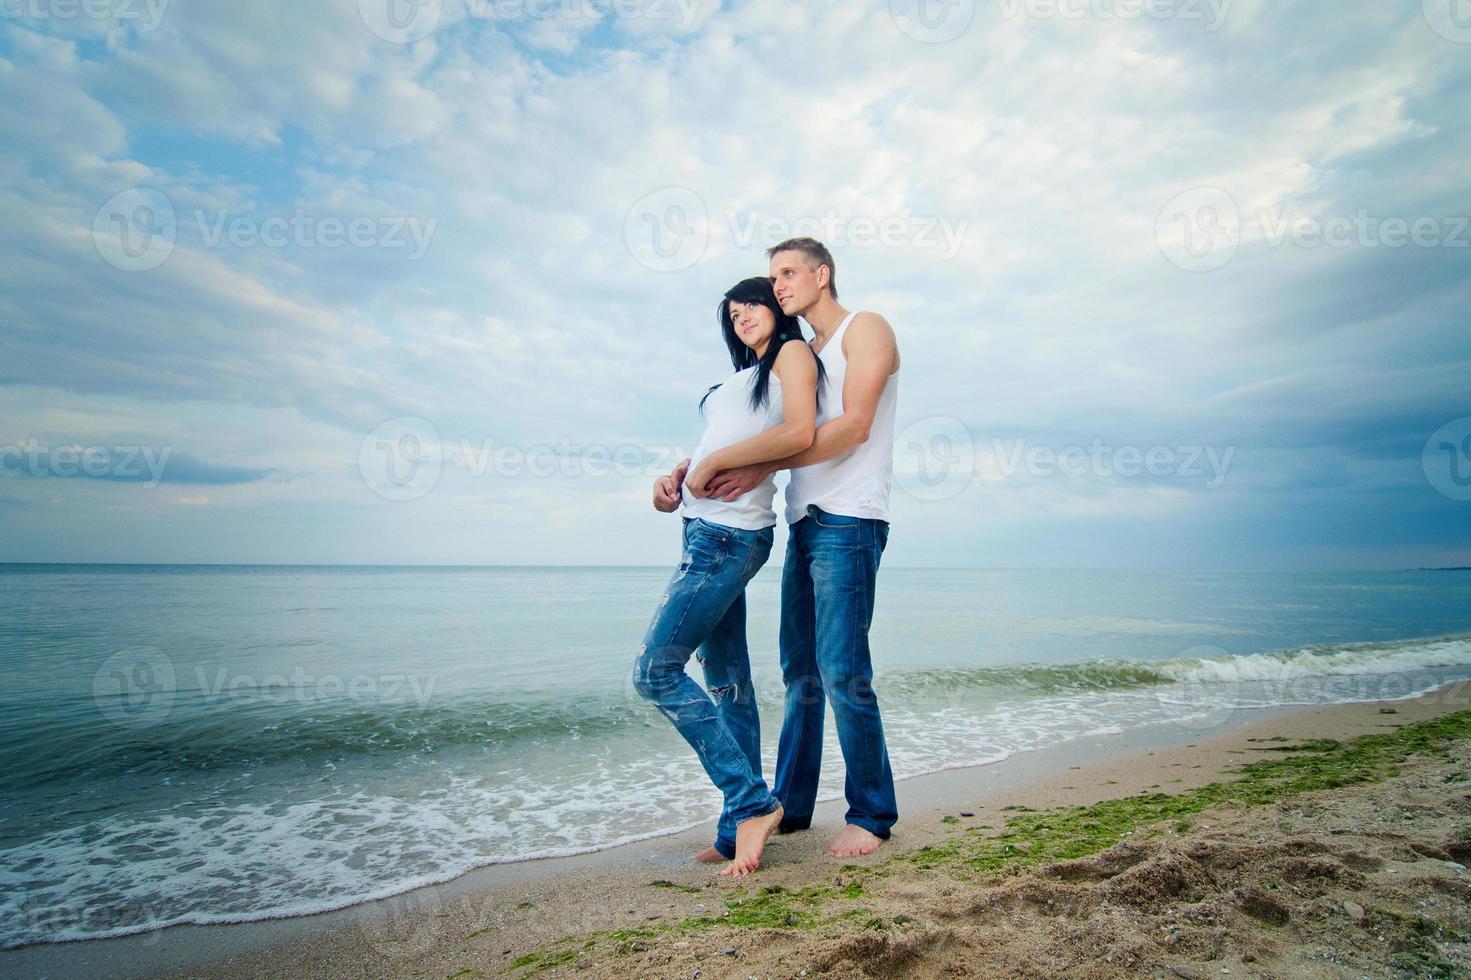 guy and a girl in jeans and white t-shirts on the beach photo